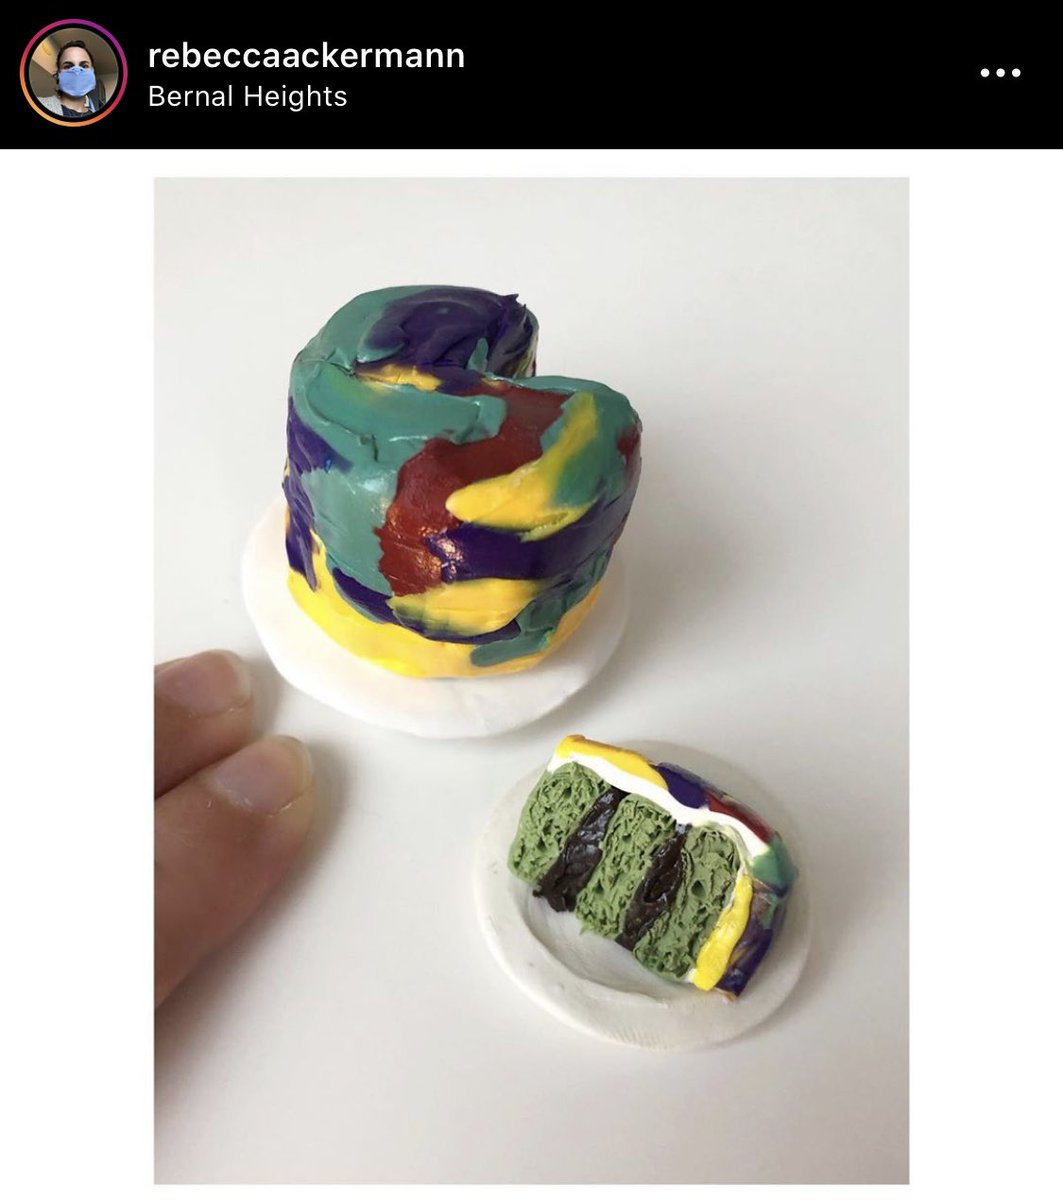 This is possibly the greatest honor of my life? Rebecca Ackermann made a clay miniature of my shiso vanilla cake with citron passionfruit buttercream?!!!?!! Check out the rest of Rebecca’s work on insta cuz it is incredible  https://instagram.com/rebeccaackermann?igshid=1pbx5v810z52a  #humblebragdiet